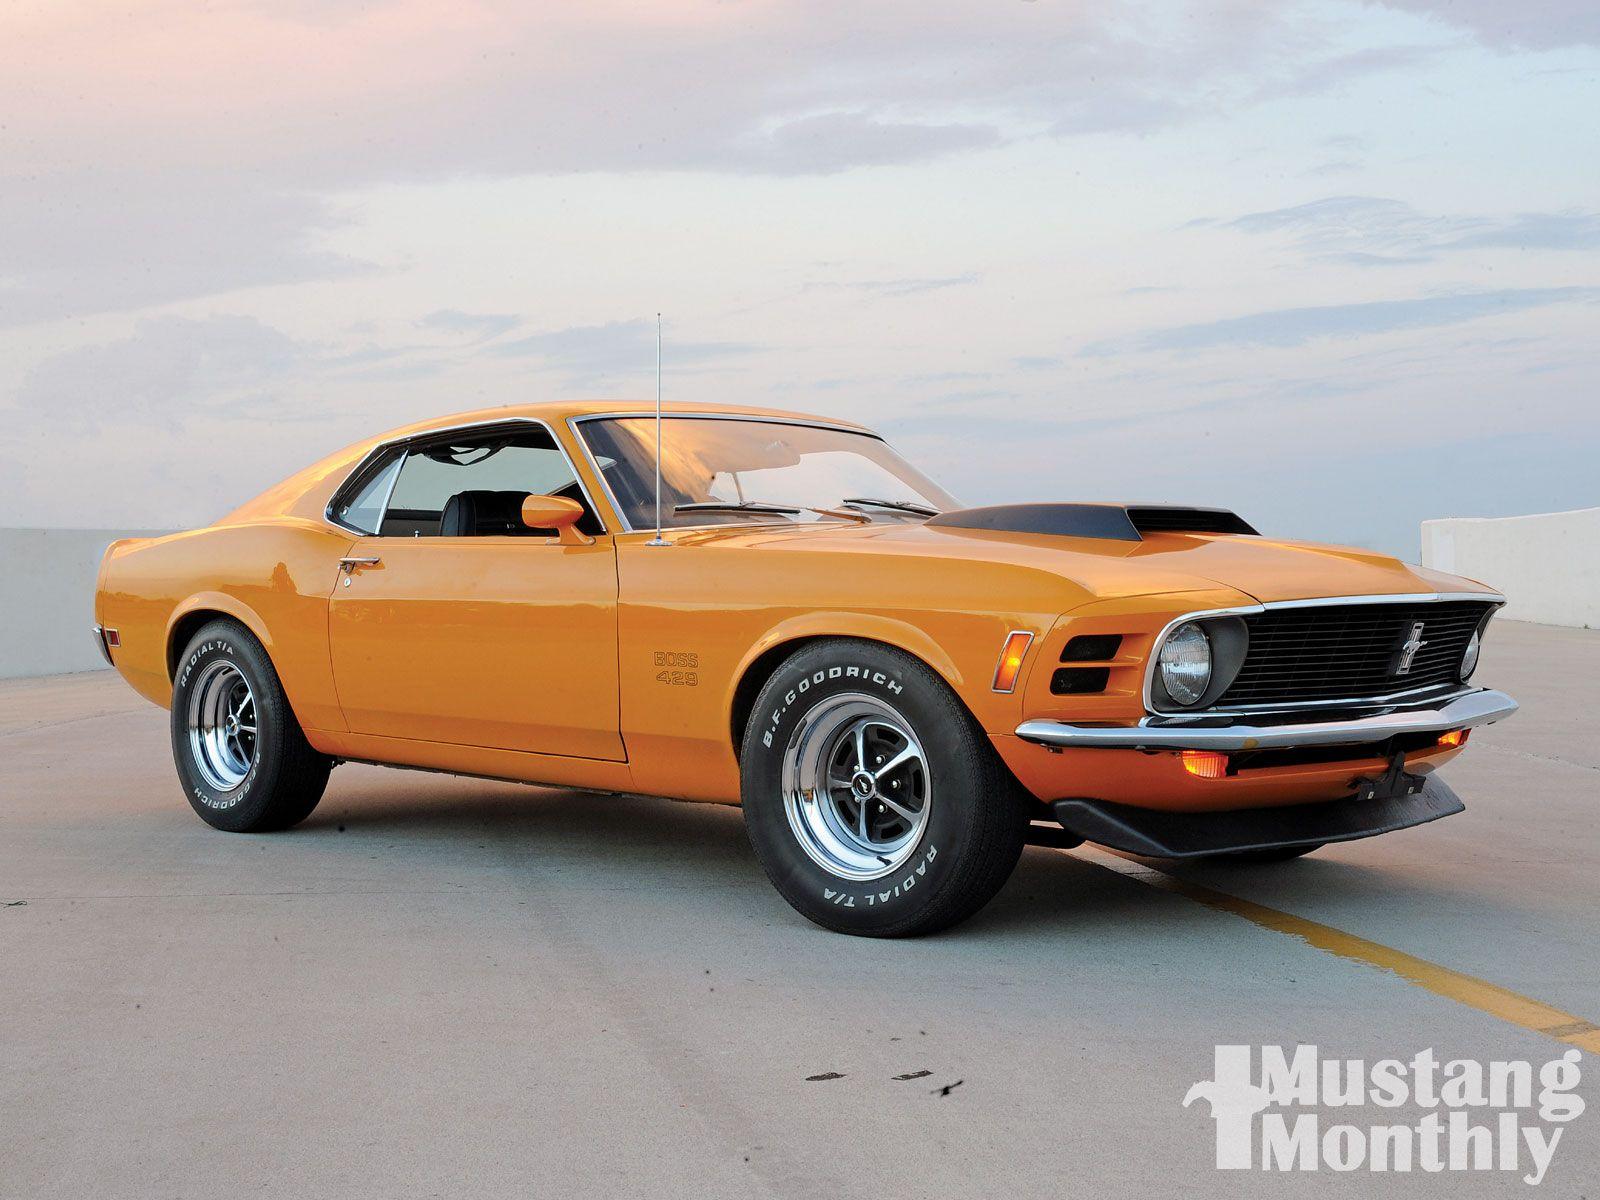 Ford Mustang Boss 429 Photo & Image Gallery